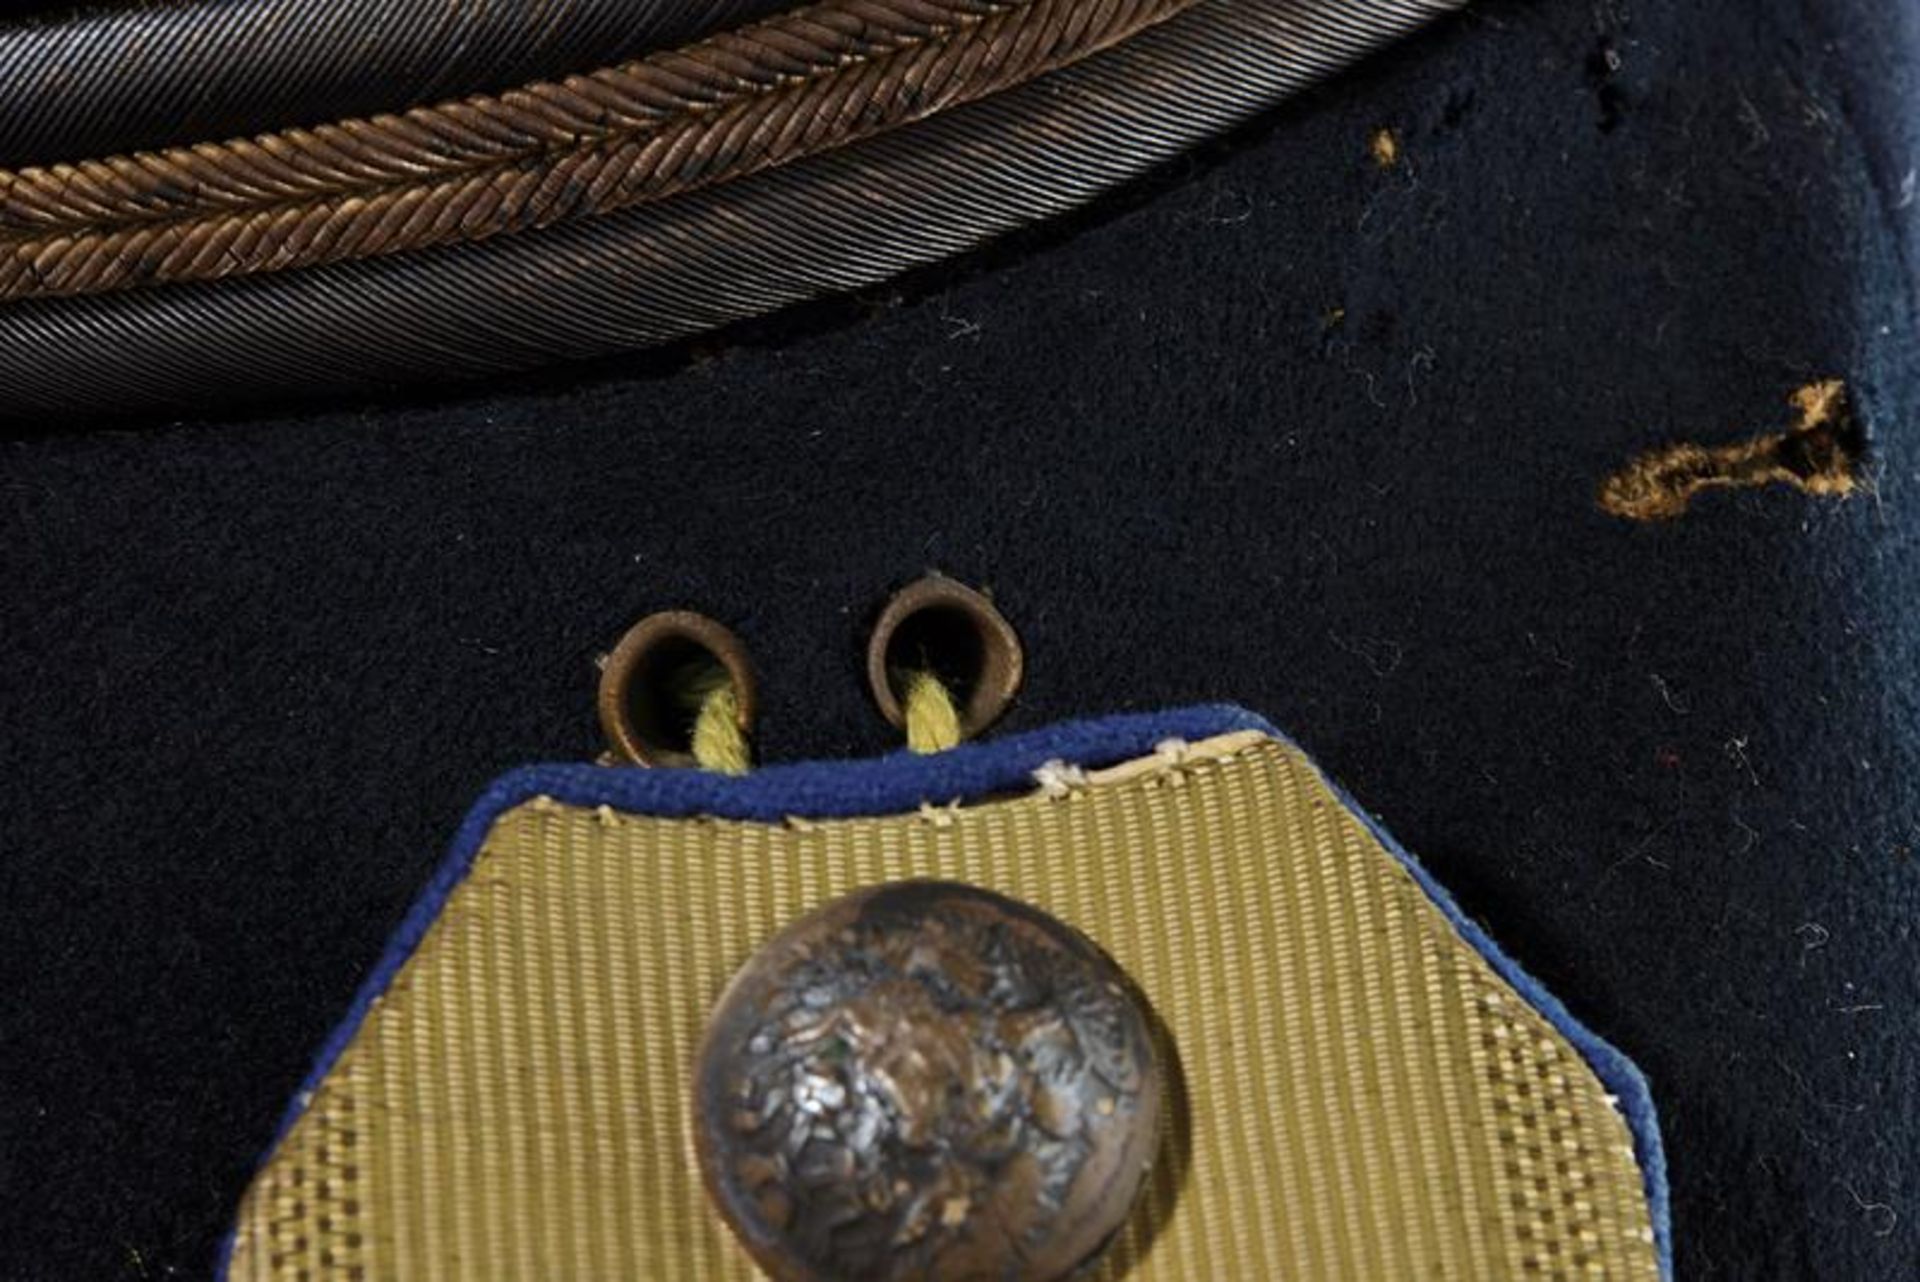 A General officer's uniform of the 3rd Finnish Battalion of jagers belonged to Tsar Alexander III - Image 6 of 21